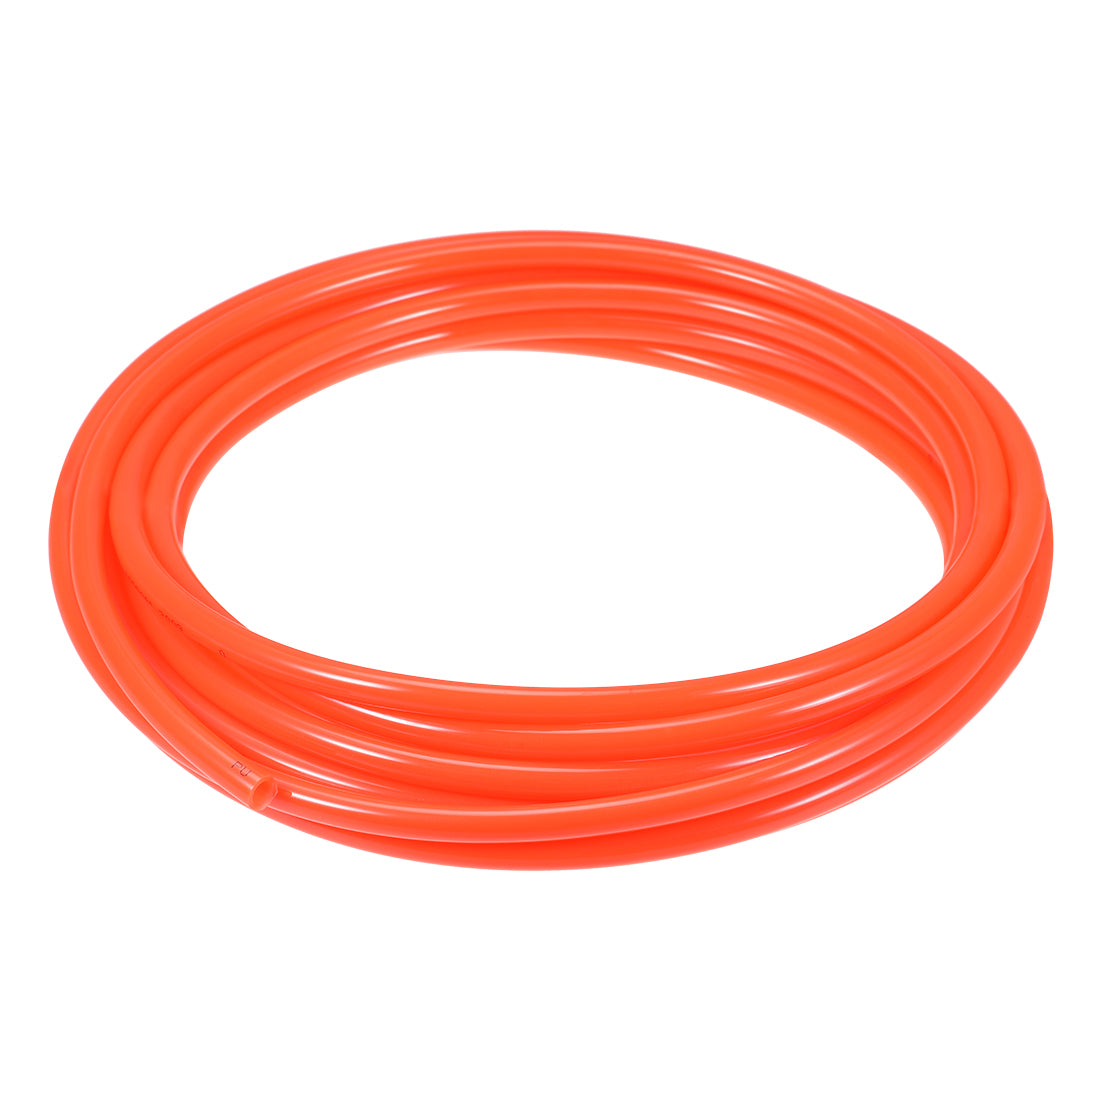 Uxcell Uxcell 10mm OD 6.5mm ID 7m Long Orange PU Air Tubing Pipe Hose for Air Line Tube Fluid Transfer Pneumatic Tubing